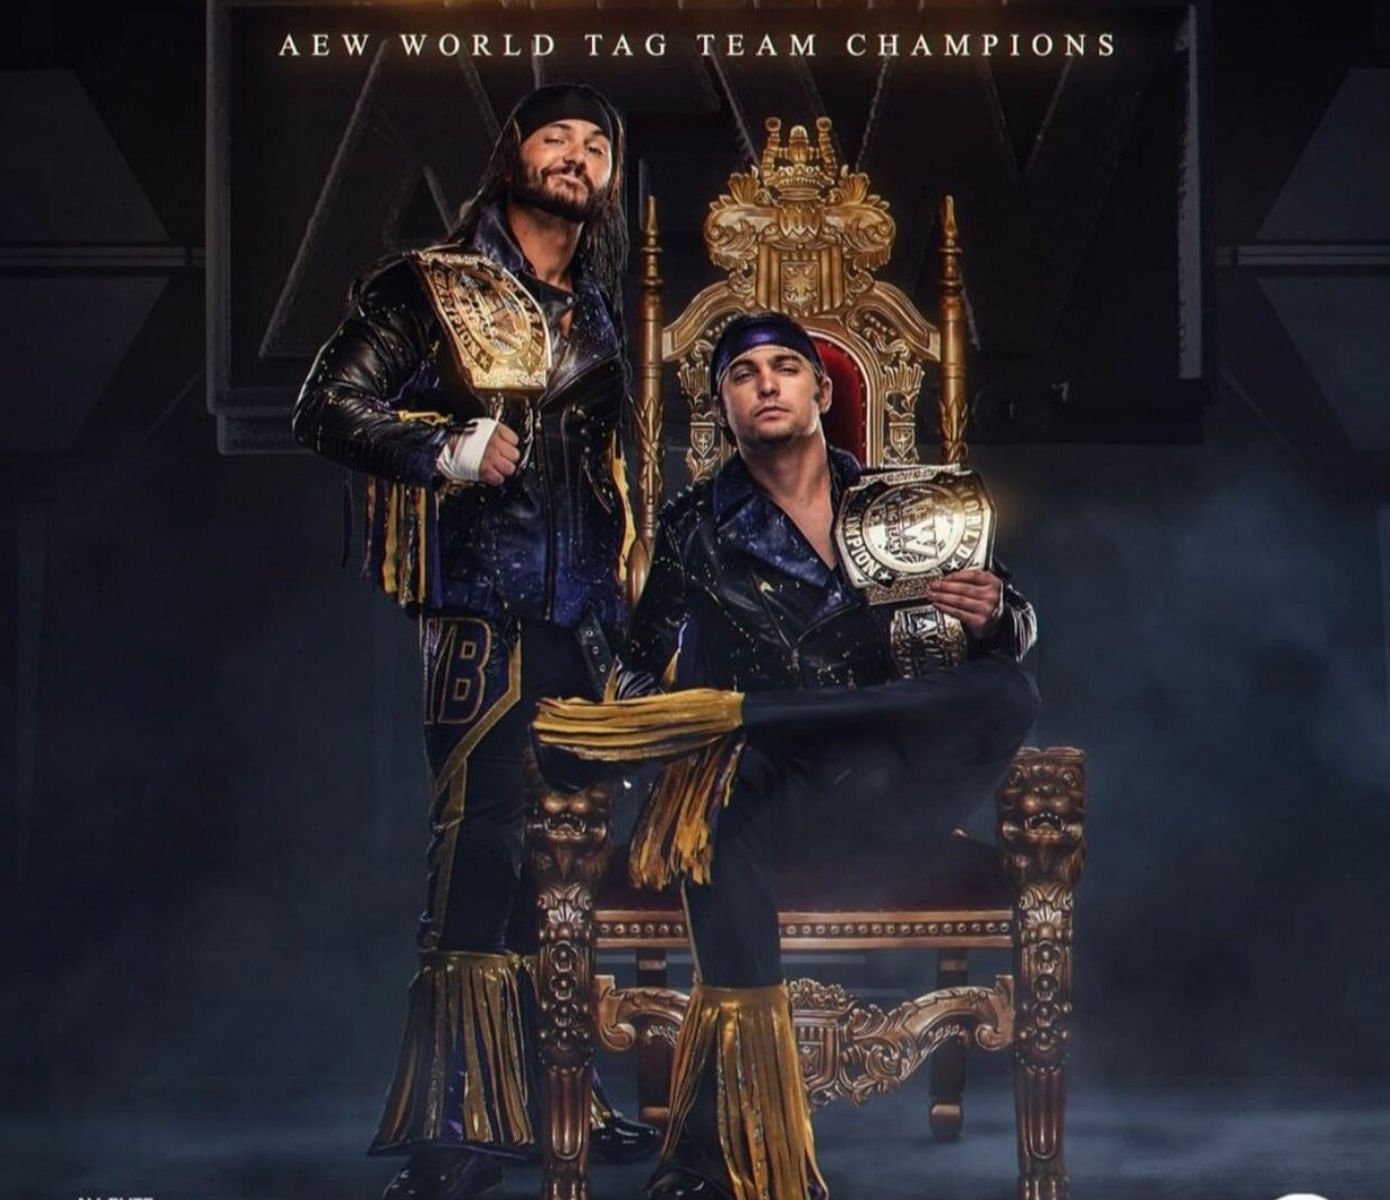 The Young Bucks have etched their names in AEW history